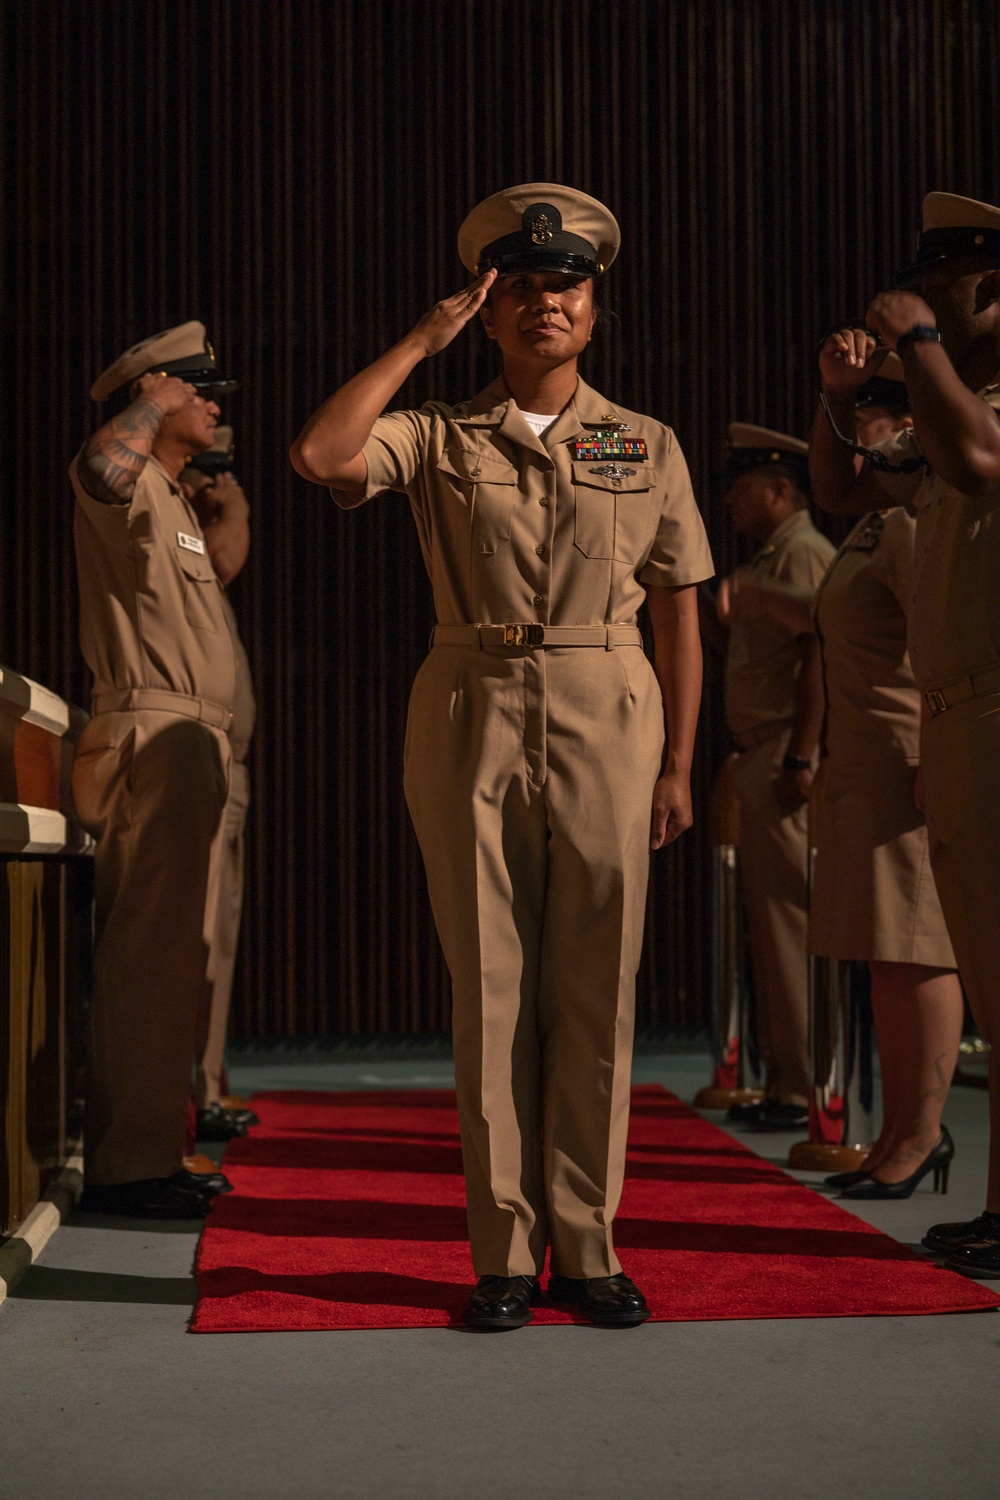 Okinawa's newest Chief Petty Officers